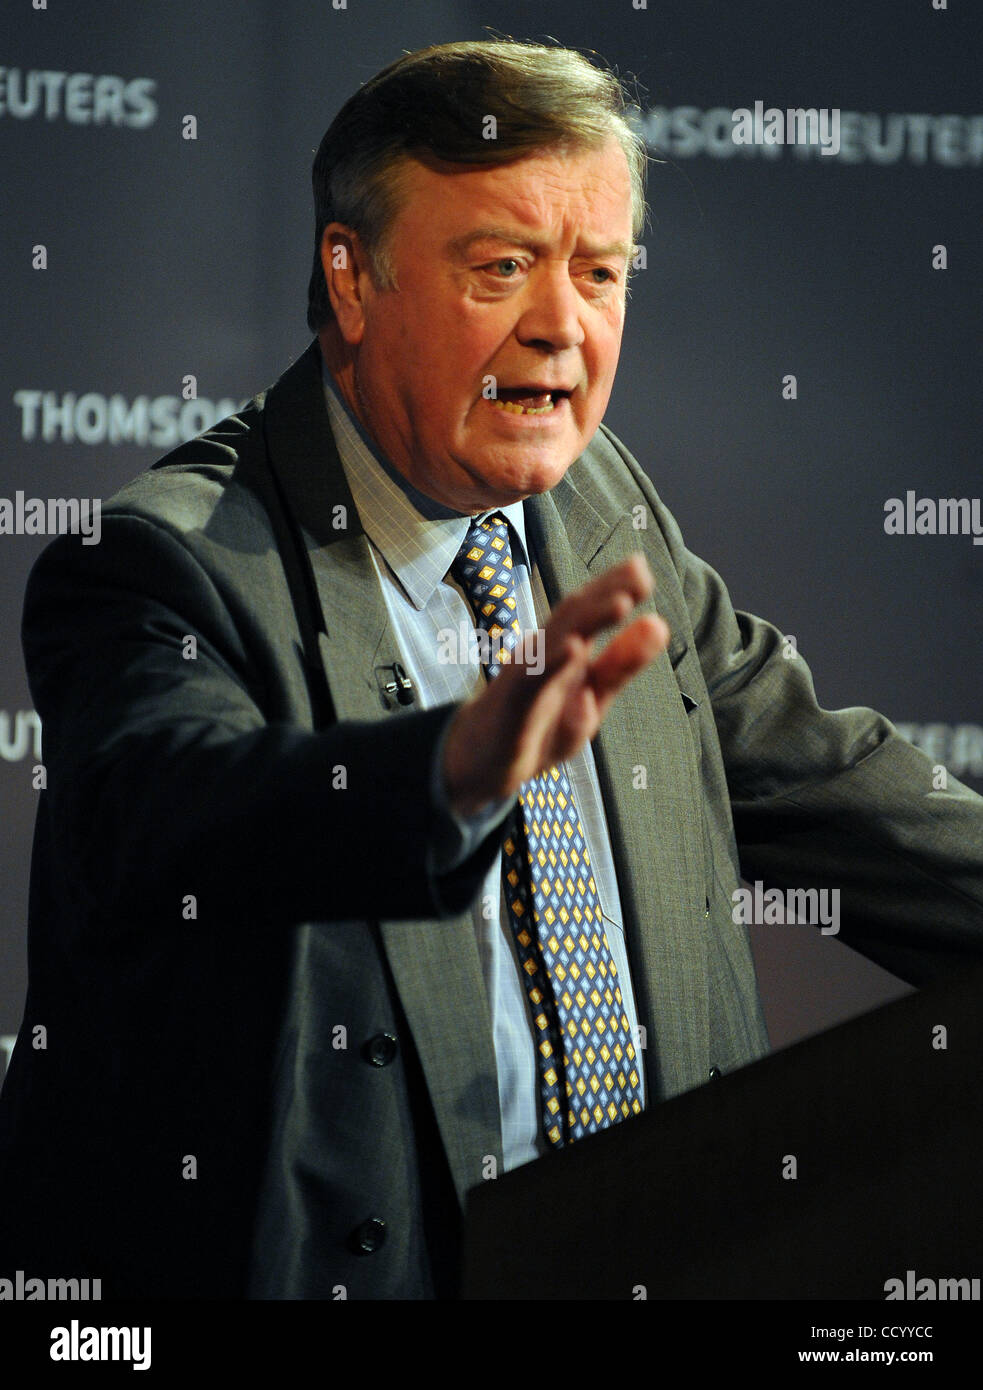 Mar. 2, 2010 - London, UK -  Ken Clarke Shadow Secretary of State for Business during his speech  Thomson Reuters, London Tuesday March 2, 2010.Photo By Andrew Parsons ....For Editorial use only,not for sale, not for marketing or advertising campaigns. (Credit Image: © Andrew Parsons/ZUMApress.com) Stock Photo